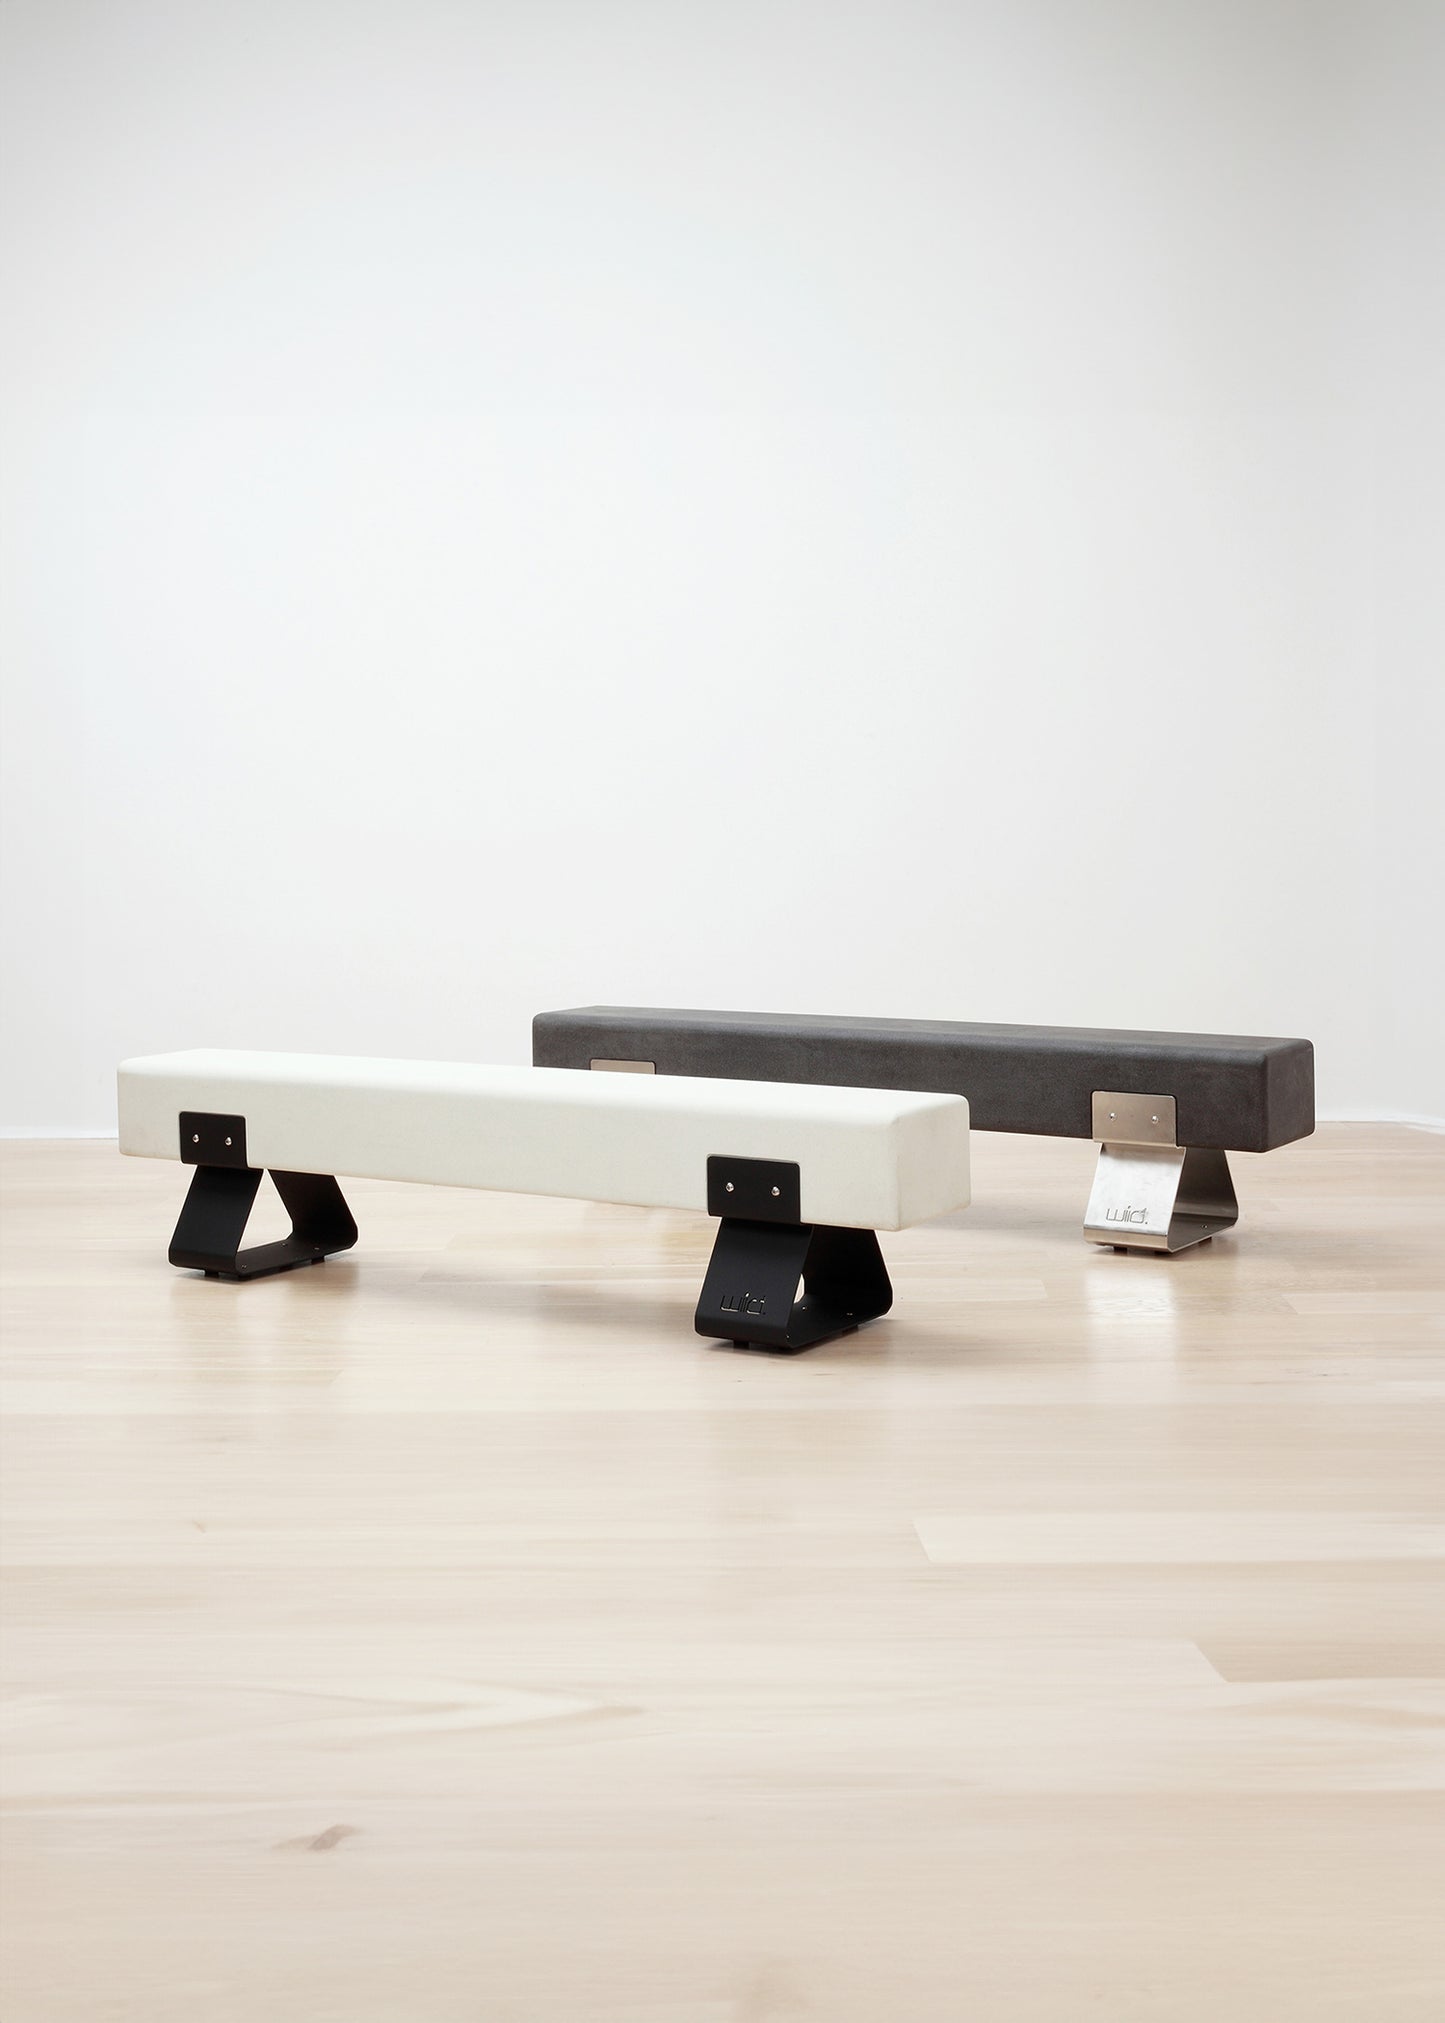 kanju interiors Wiid Design concrete bench in charcoal or white, powder matte black stainless steel legs or polished steel legs, a masterpiece in luxury home decor. Its design combines timeless elegance with contemporary artistic flair. Perfect for upscale Living rooms, dining room or bedrooms, this table embodies sophisticated style and the fine craftsmanship of African design, appealing to those who appreciate unique, artisanal furniture.